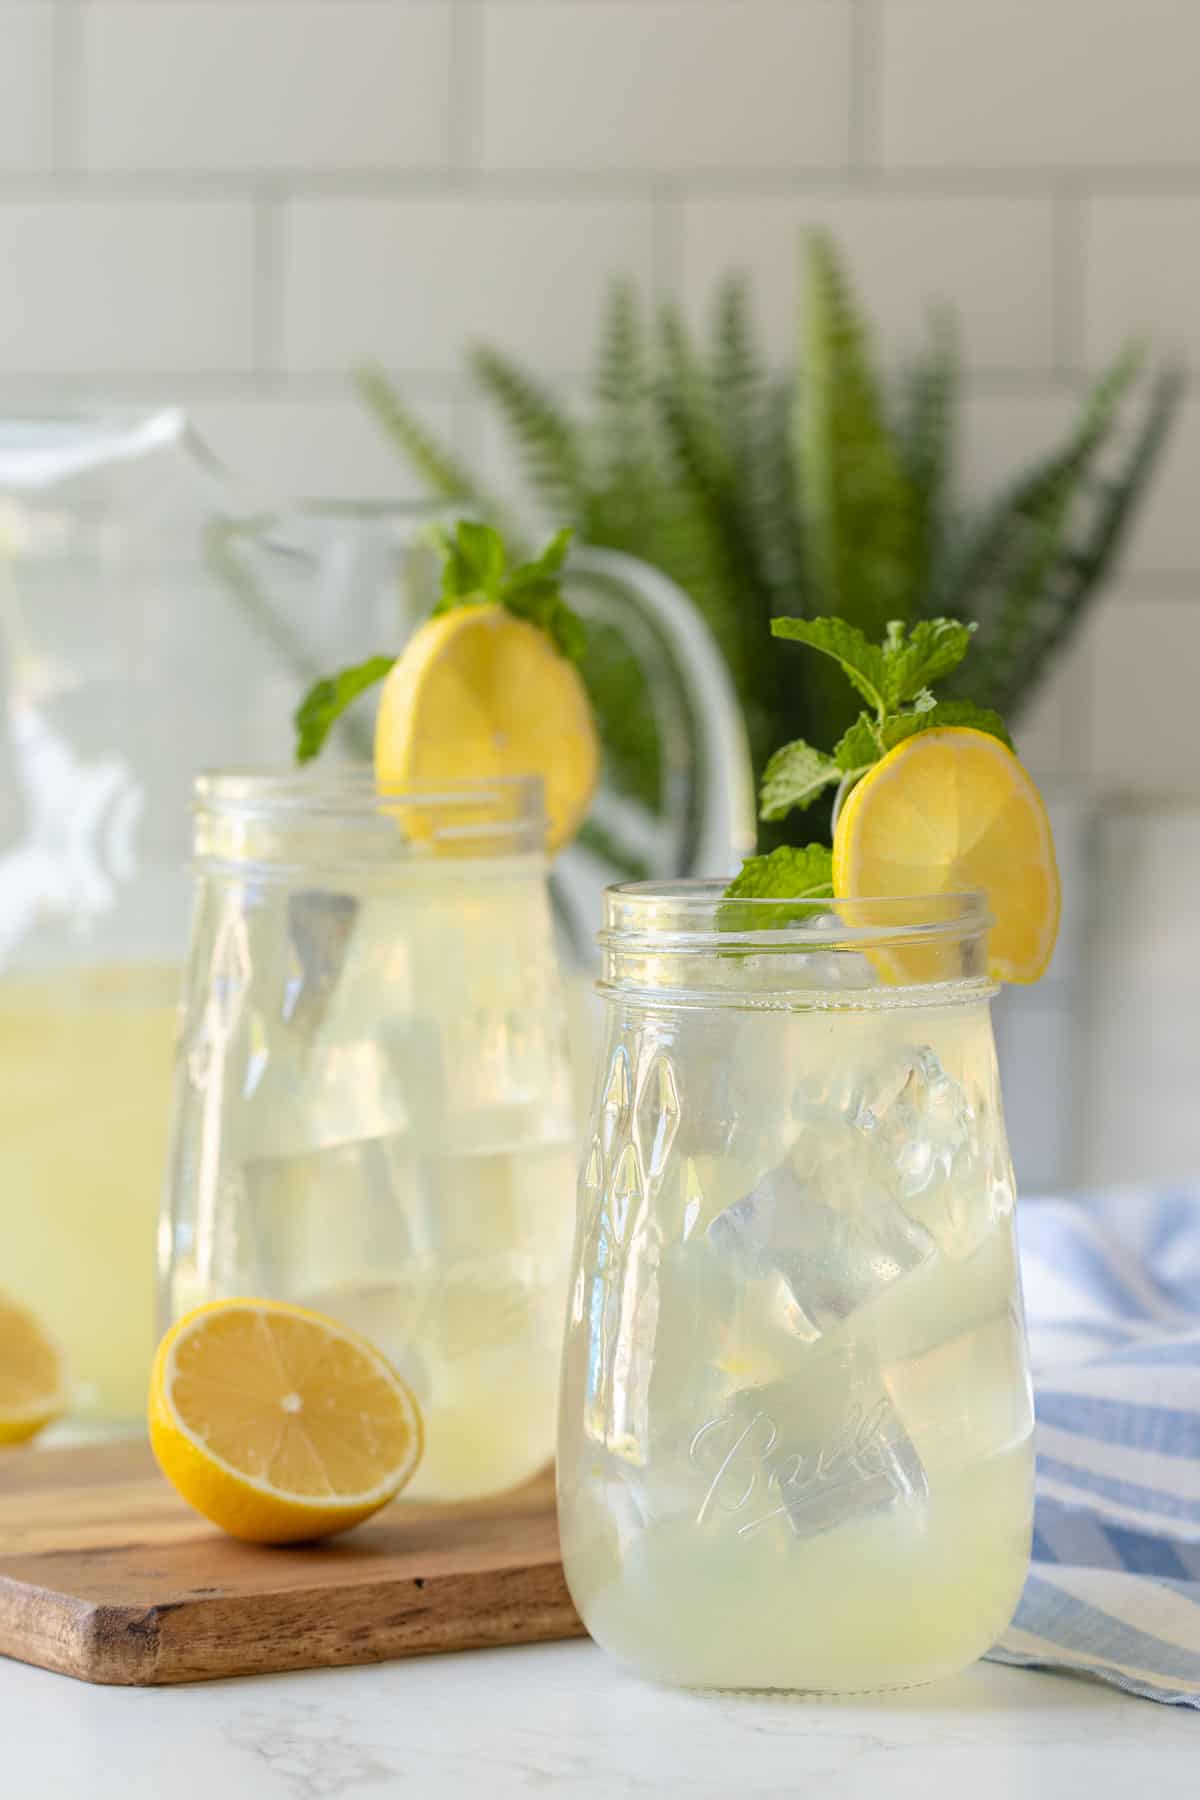 Front view of two Mason jars of lemonade garnished with lemon wheels and mint sprigs.